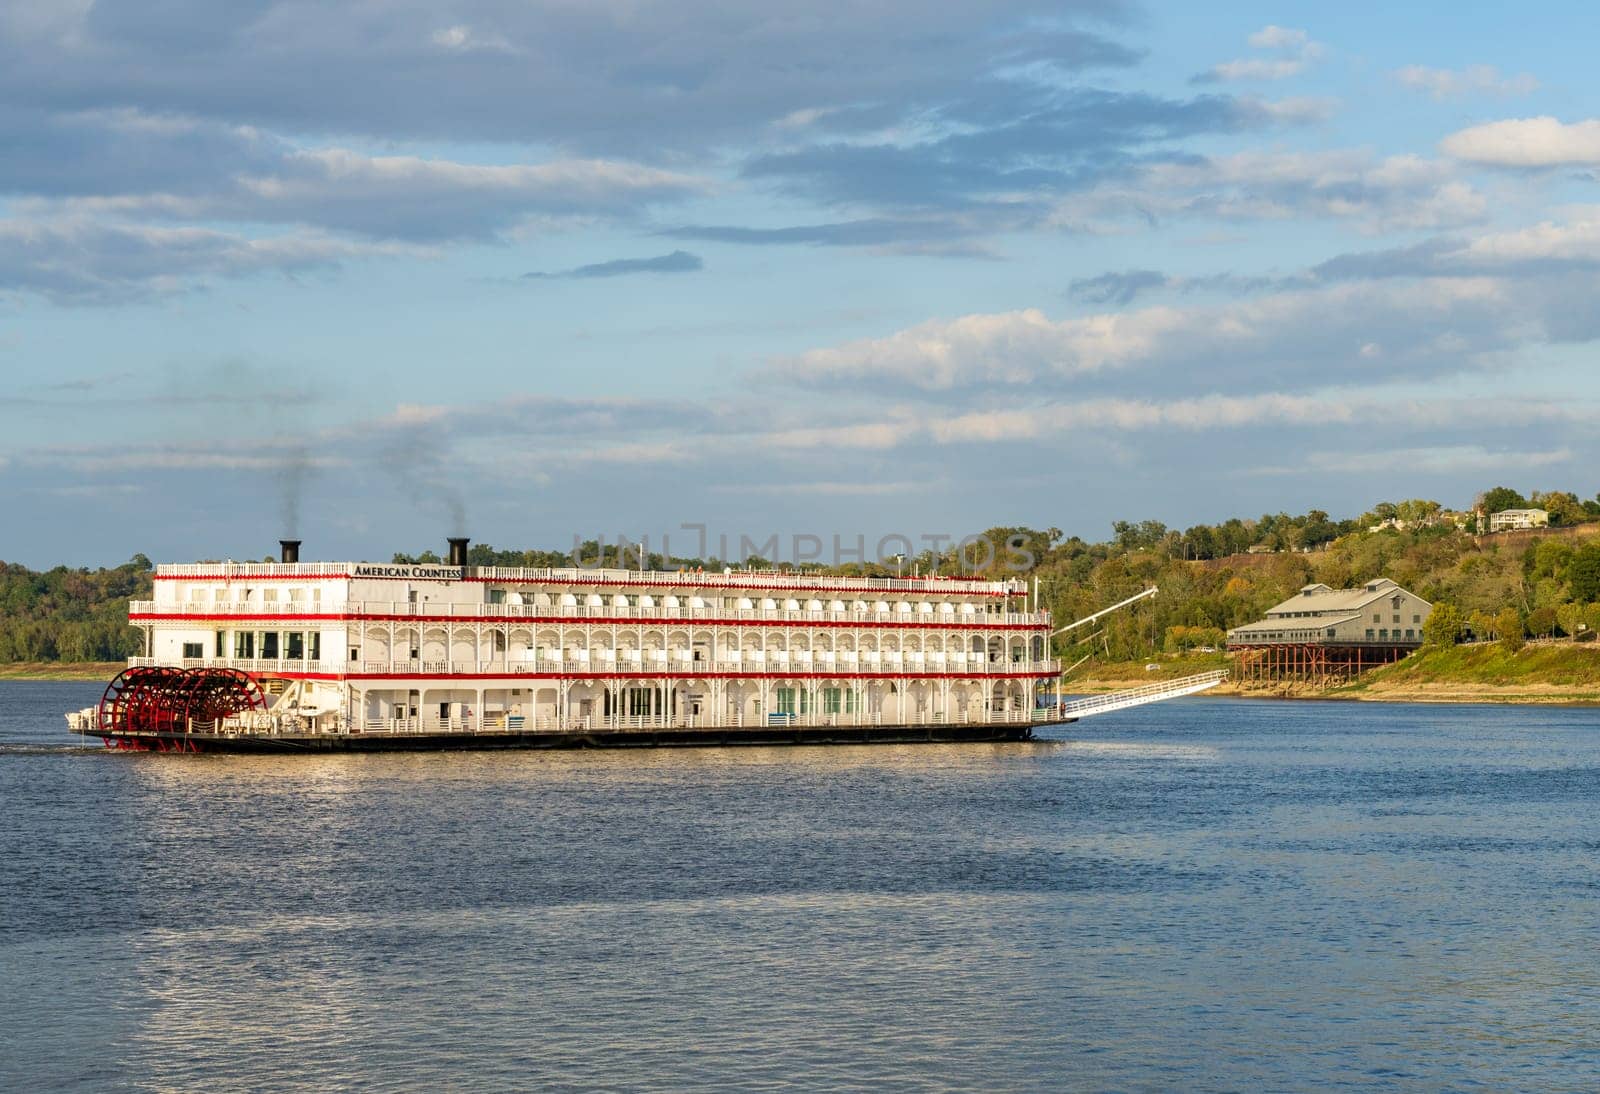 Paddle Steamer American Countess arrives in Natchez Mississippi by steheap